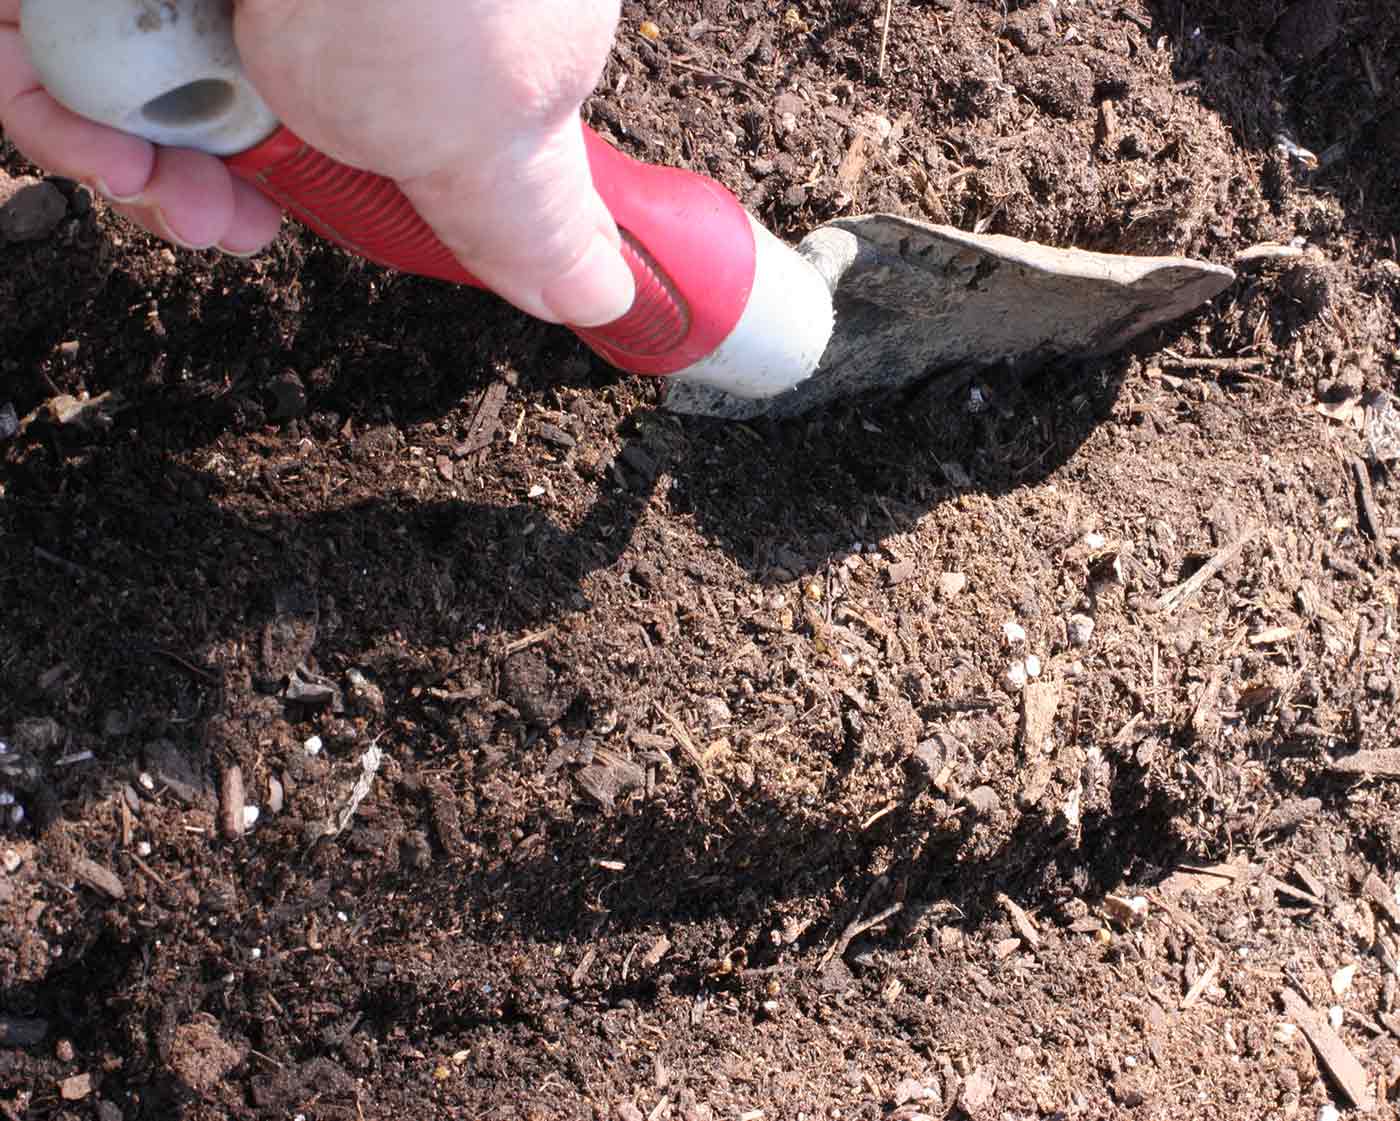 Using a hand trowel to dig a shallow trench for cilantro seeds.